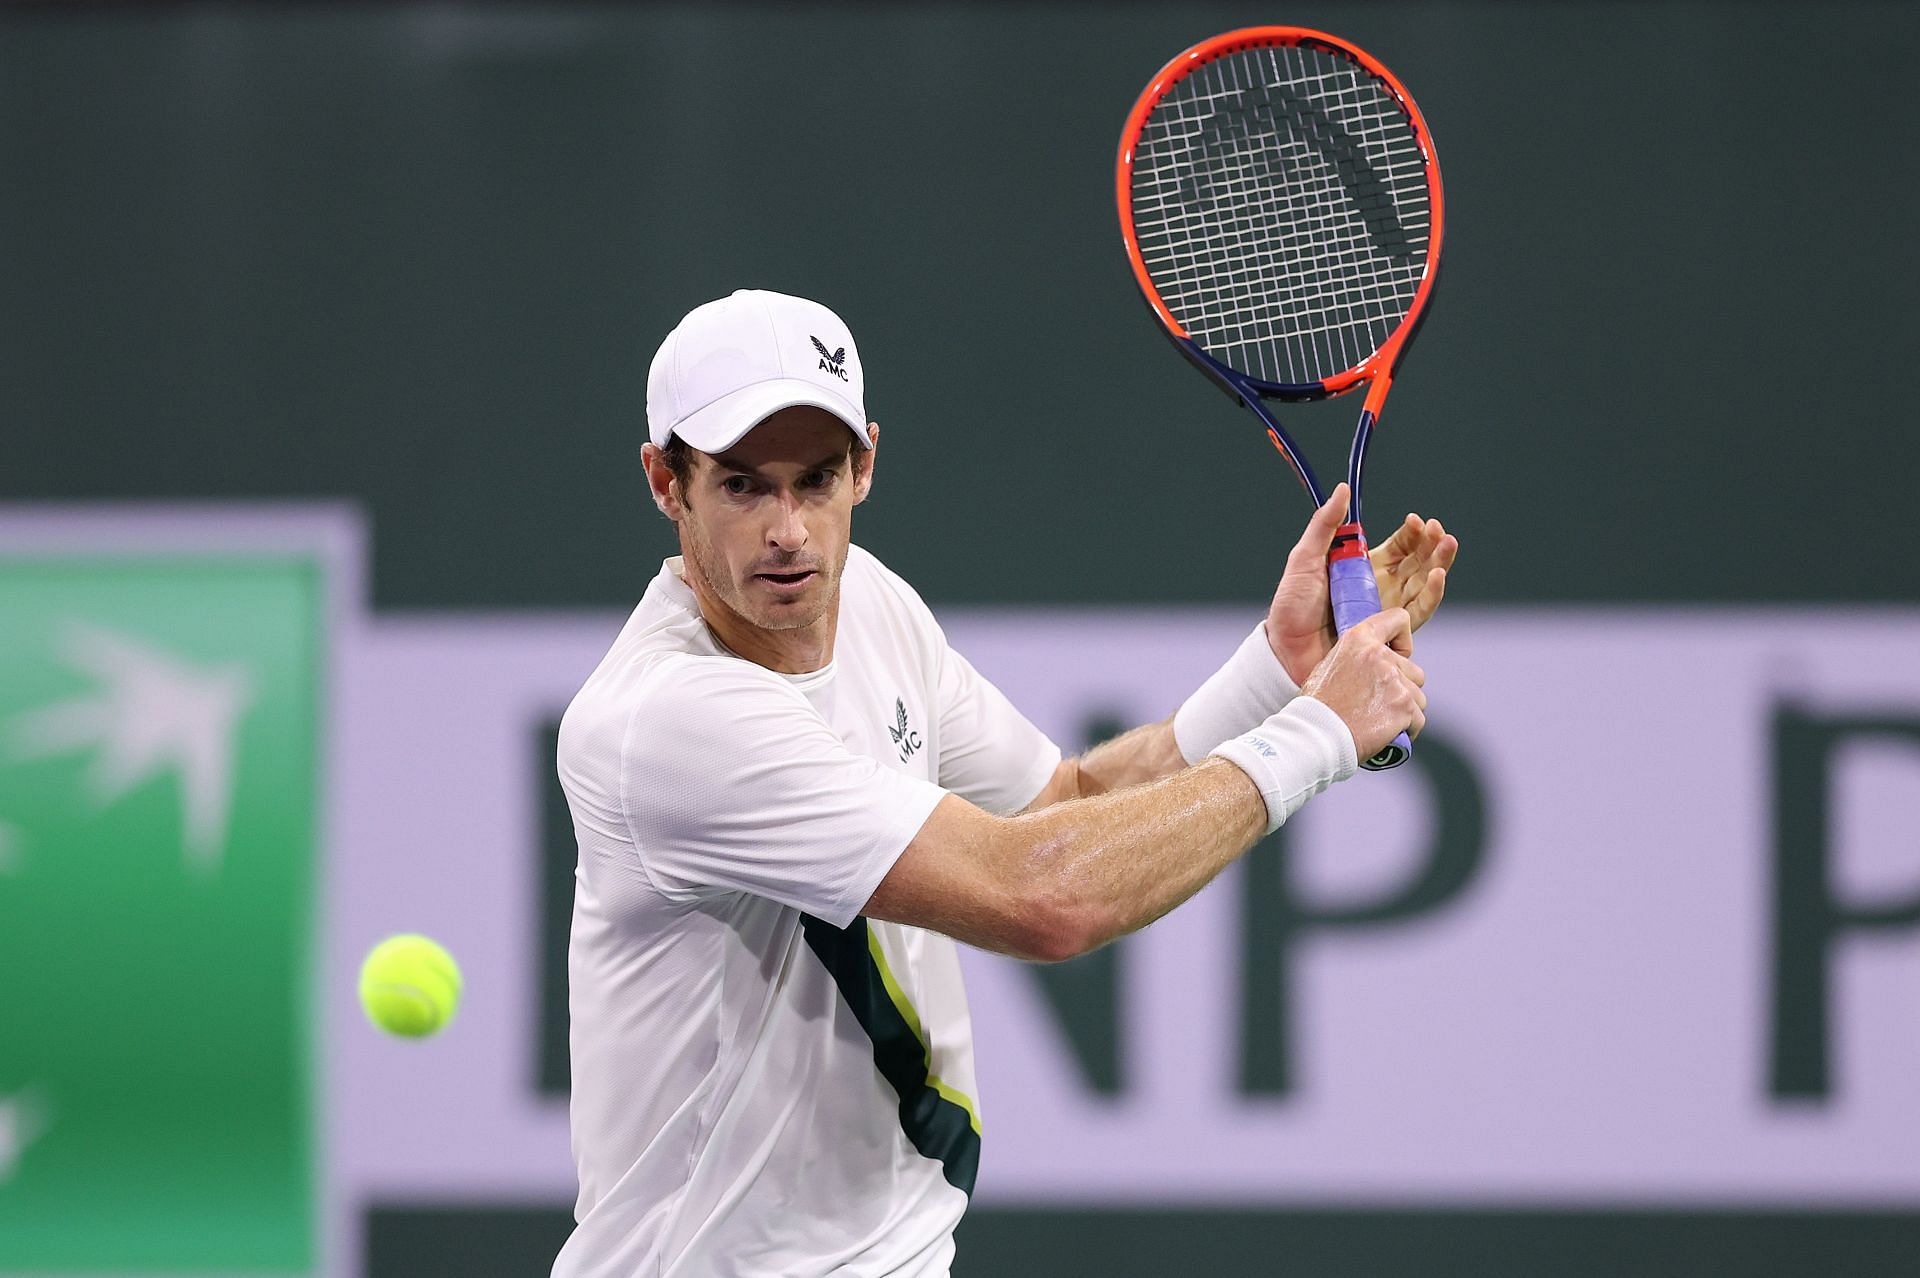 Andy Murray at the BNP Paribas Open